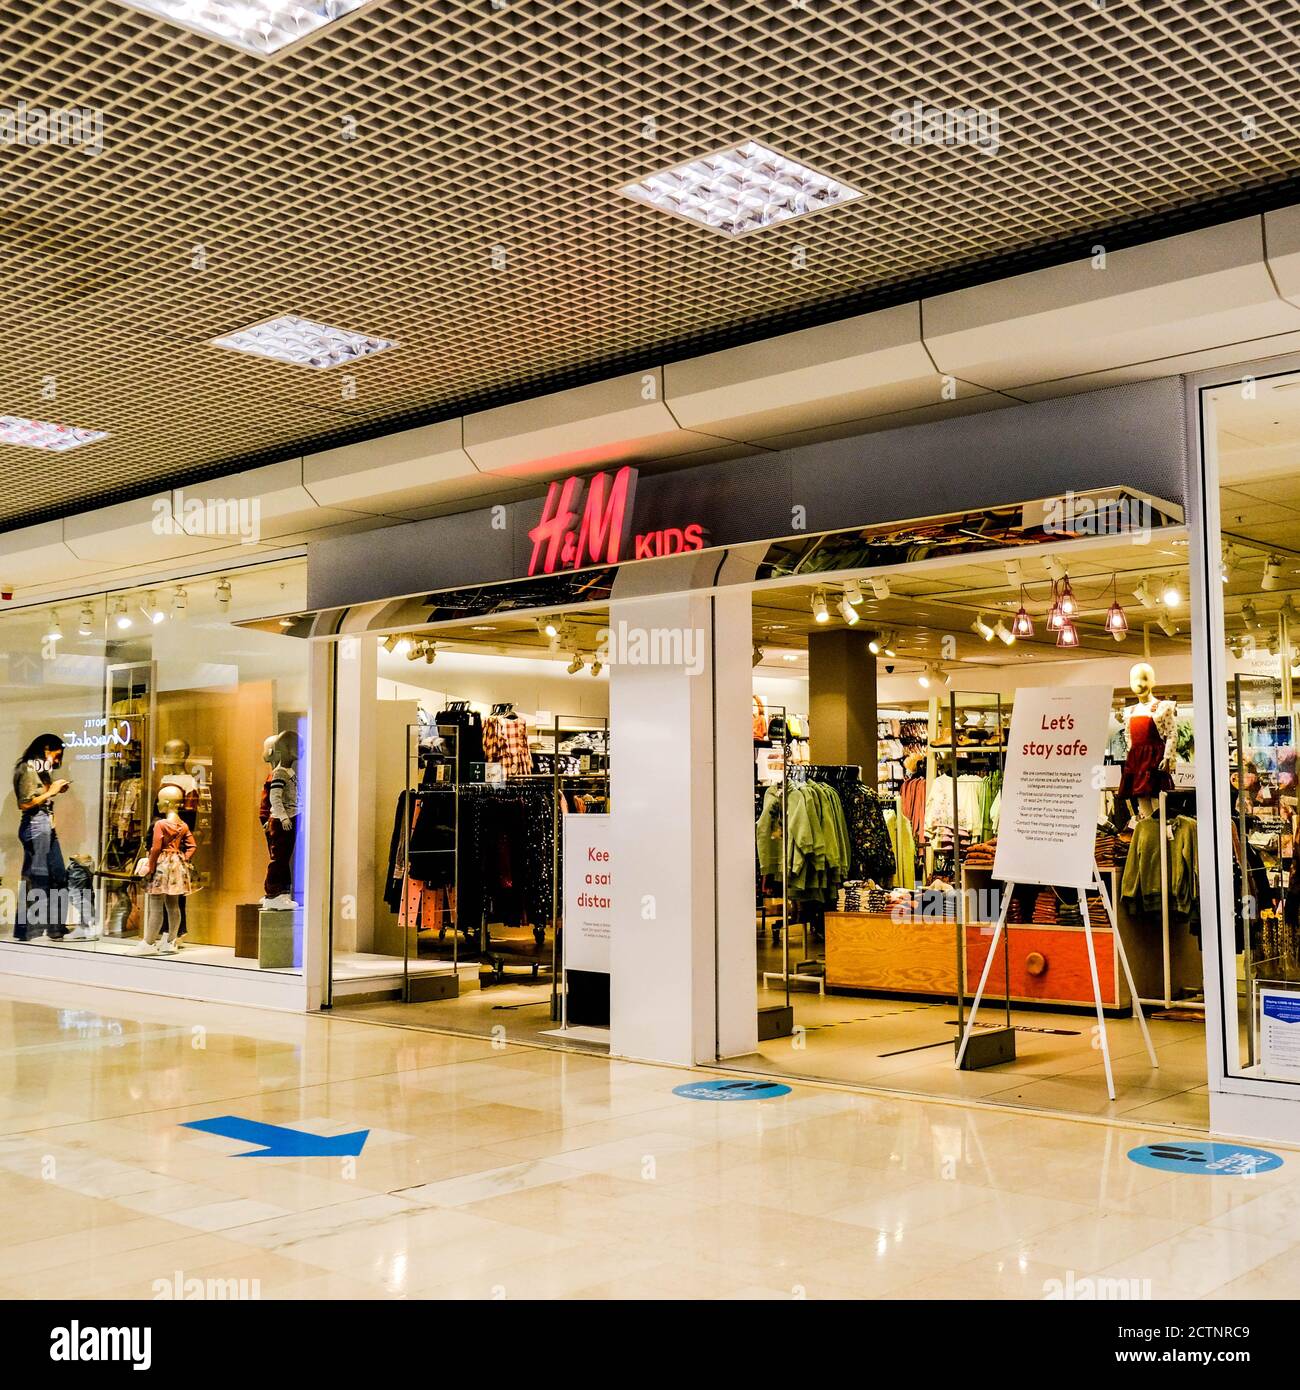 London UK, September 24 2020, H&M Kids Retail Store Offering Affordable and  Sustainable Childrens Clothing Stock Photo - Alamy